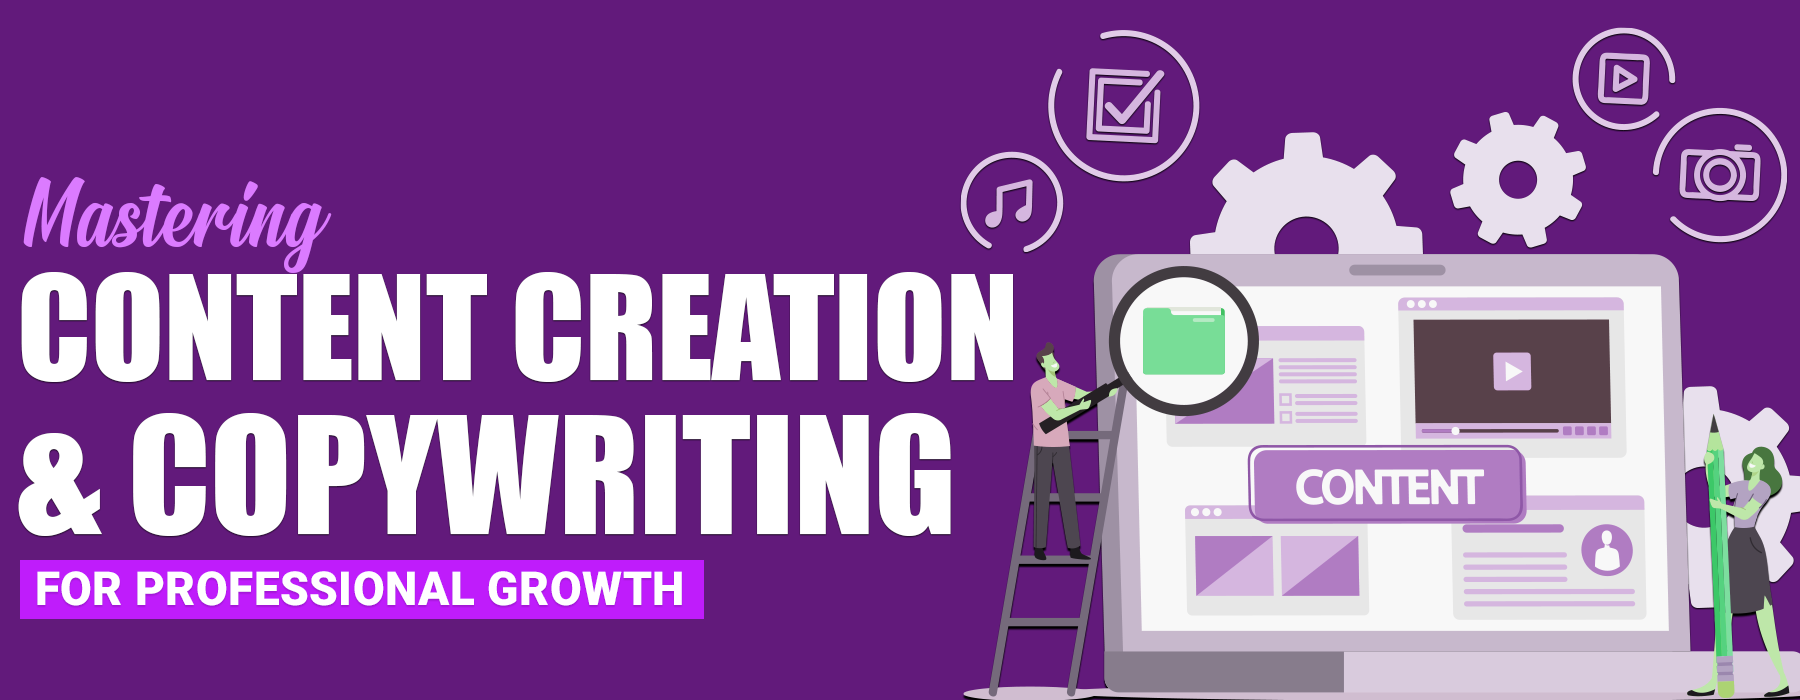 Mastering Content Creation and Copywriting for Professional Growth